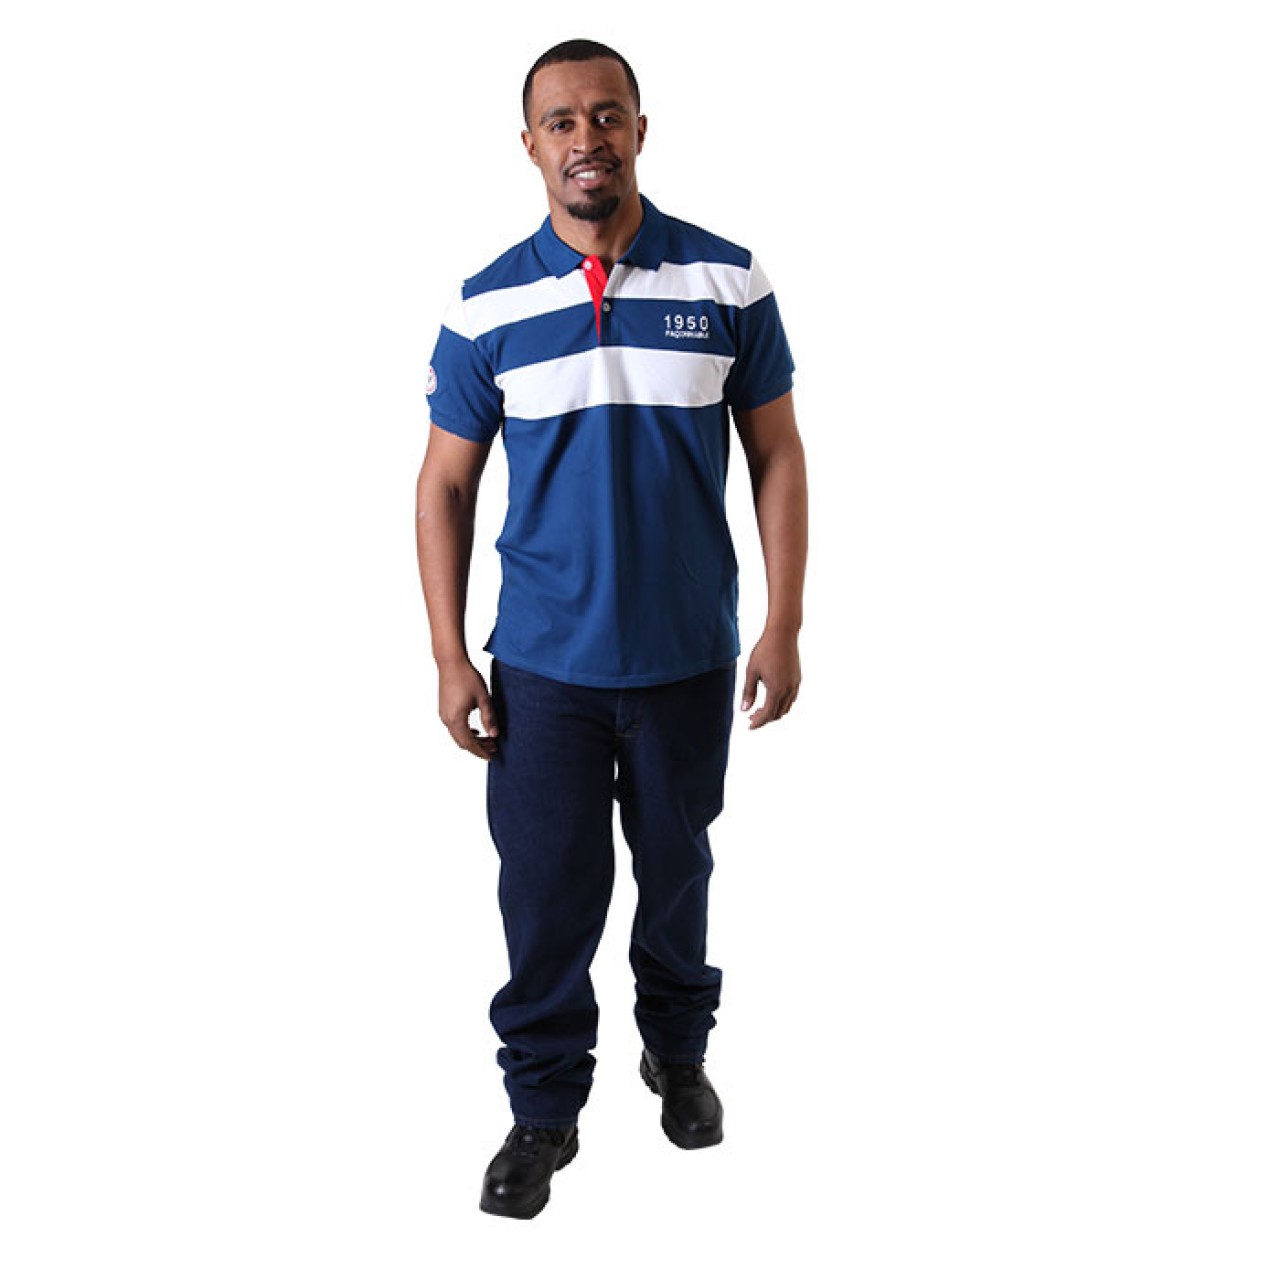 Men's Stylish Fit Blue And White Striped Polo Shirt Collared Tees